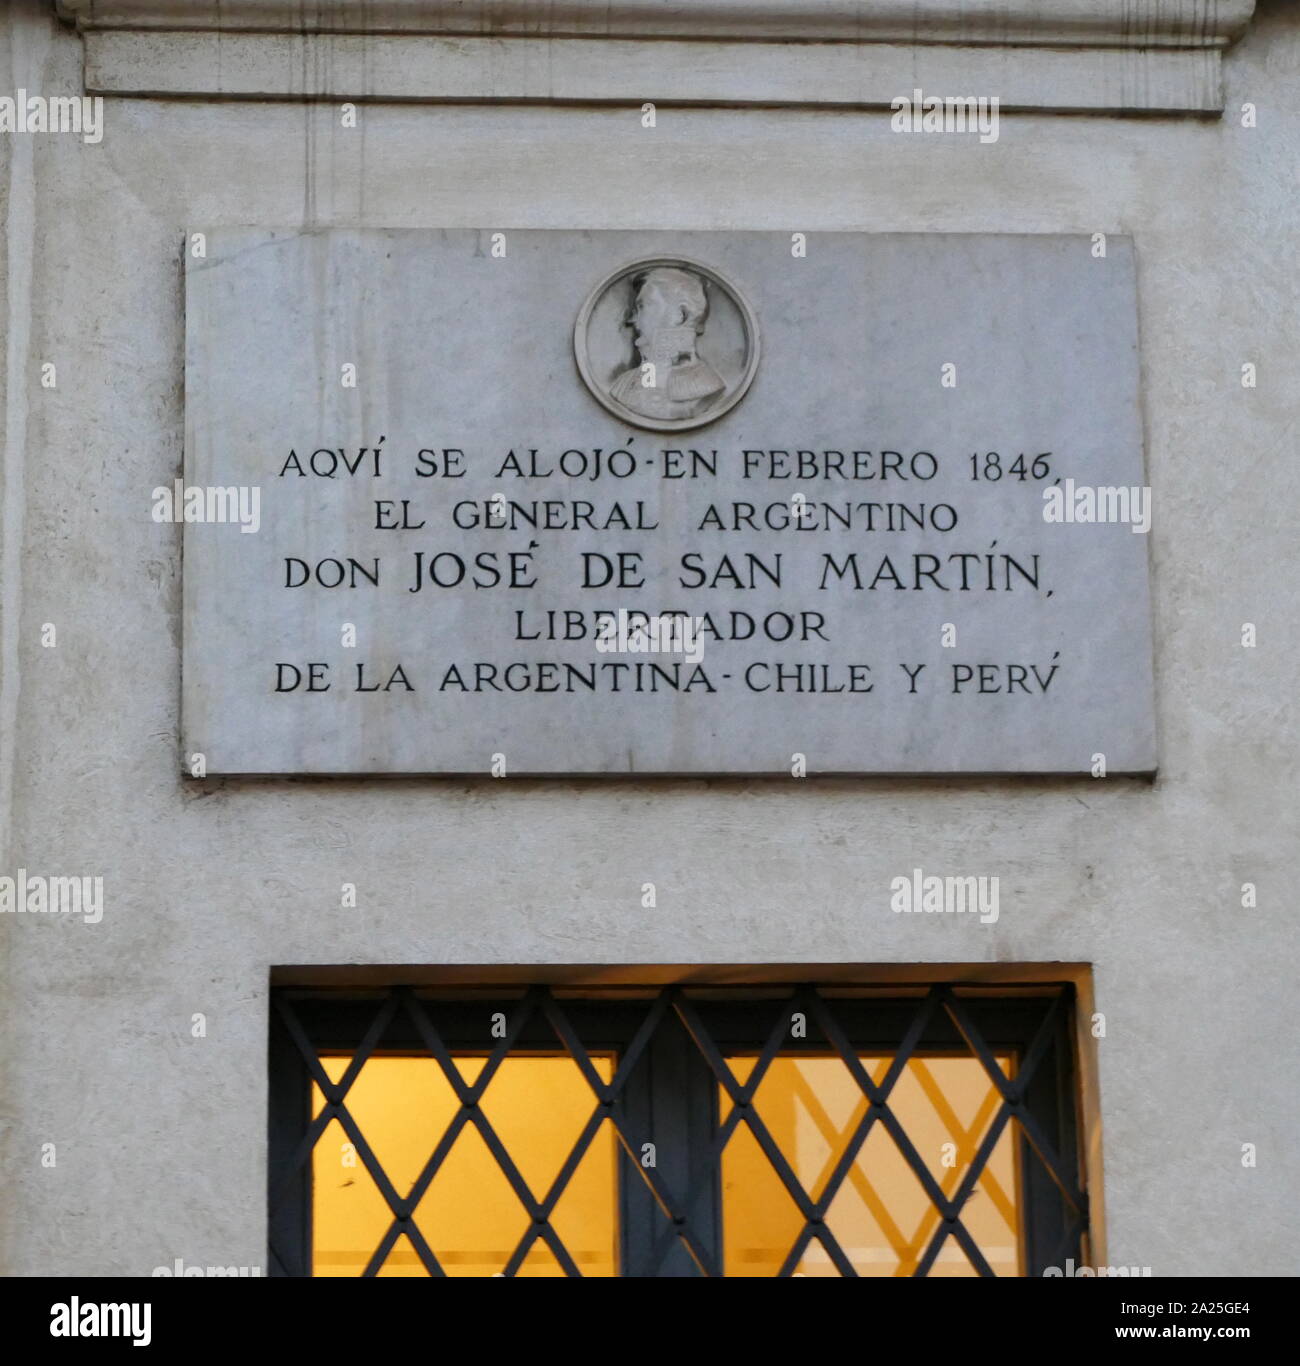 Plaque commemorating Jose de San Martin (1778-1850) a Spanish-Argentine general and the prime leader of the southern and central parts of South America's successful struggle for independence from the Spanish Empire who served as the Protector of Peru. Stock Photo